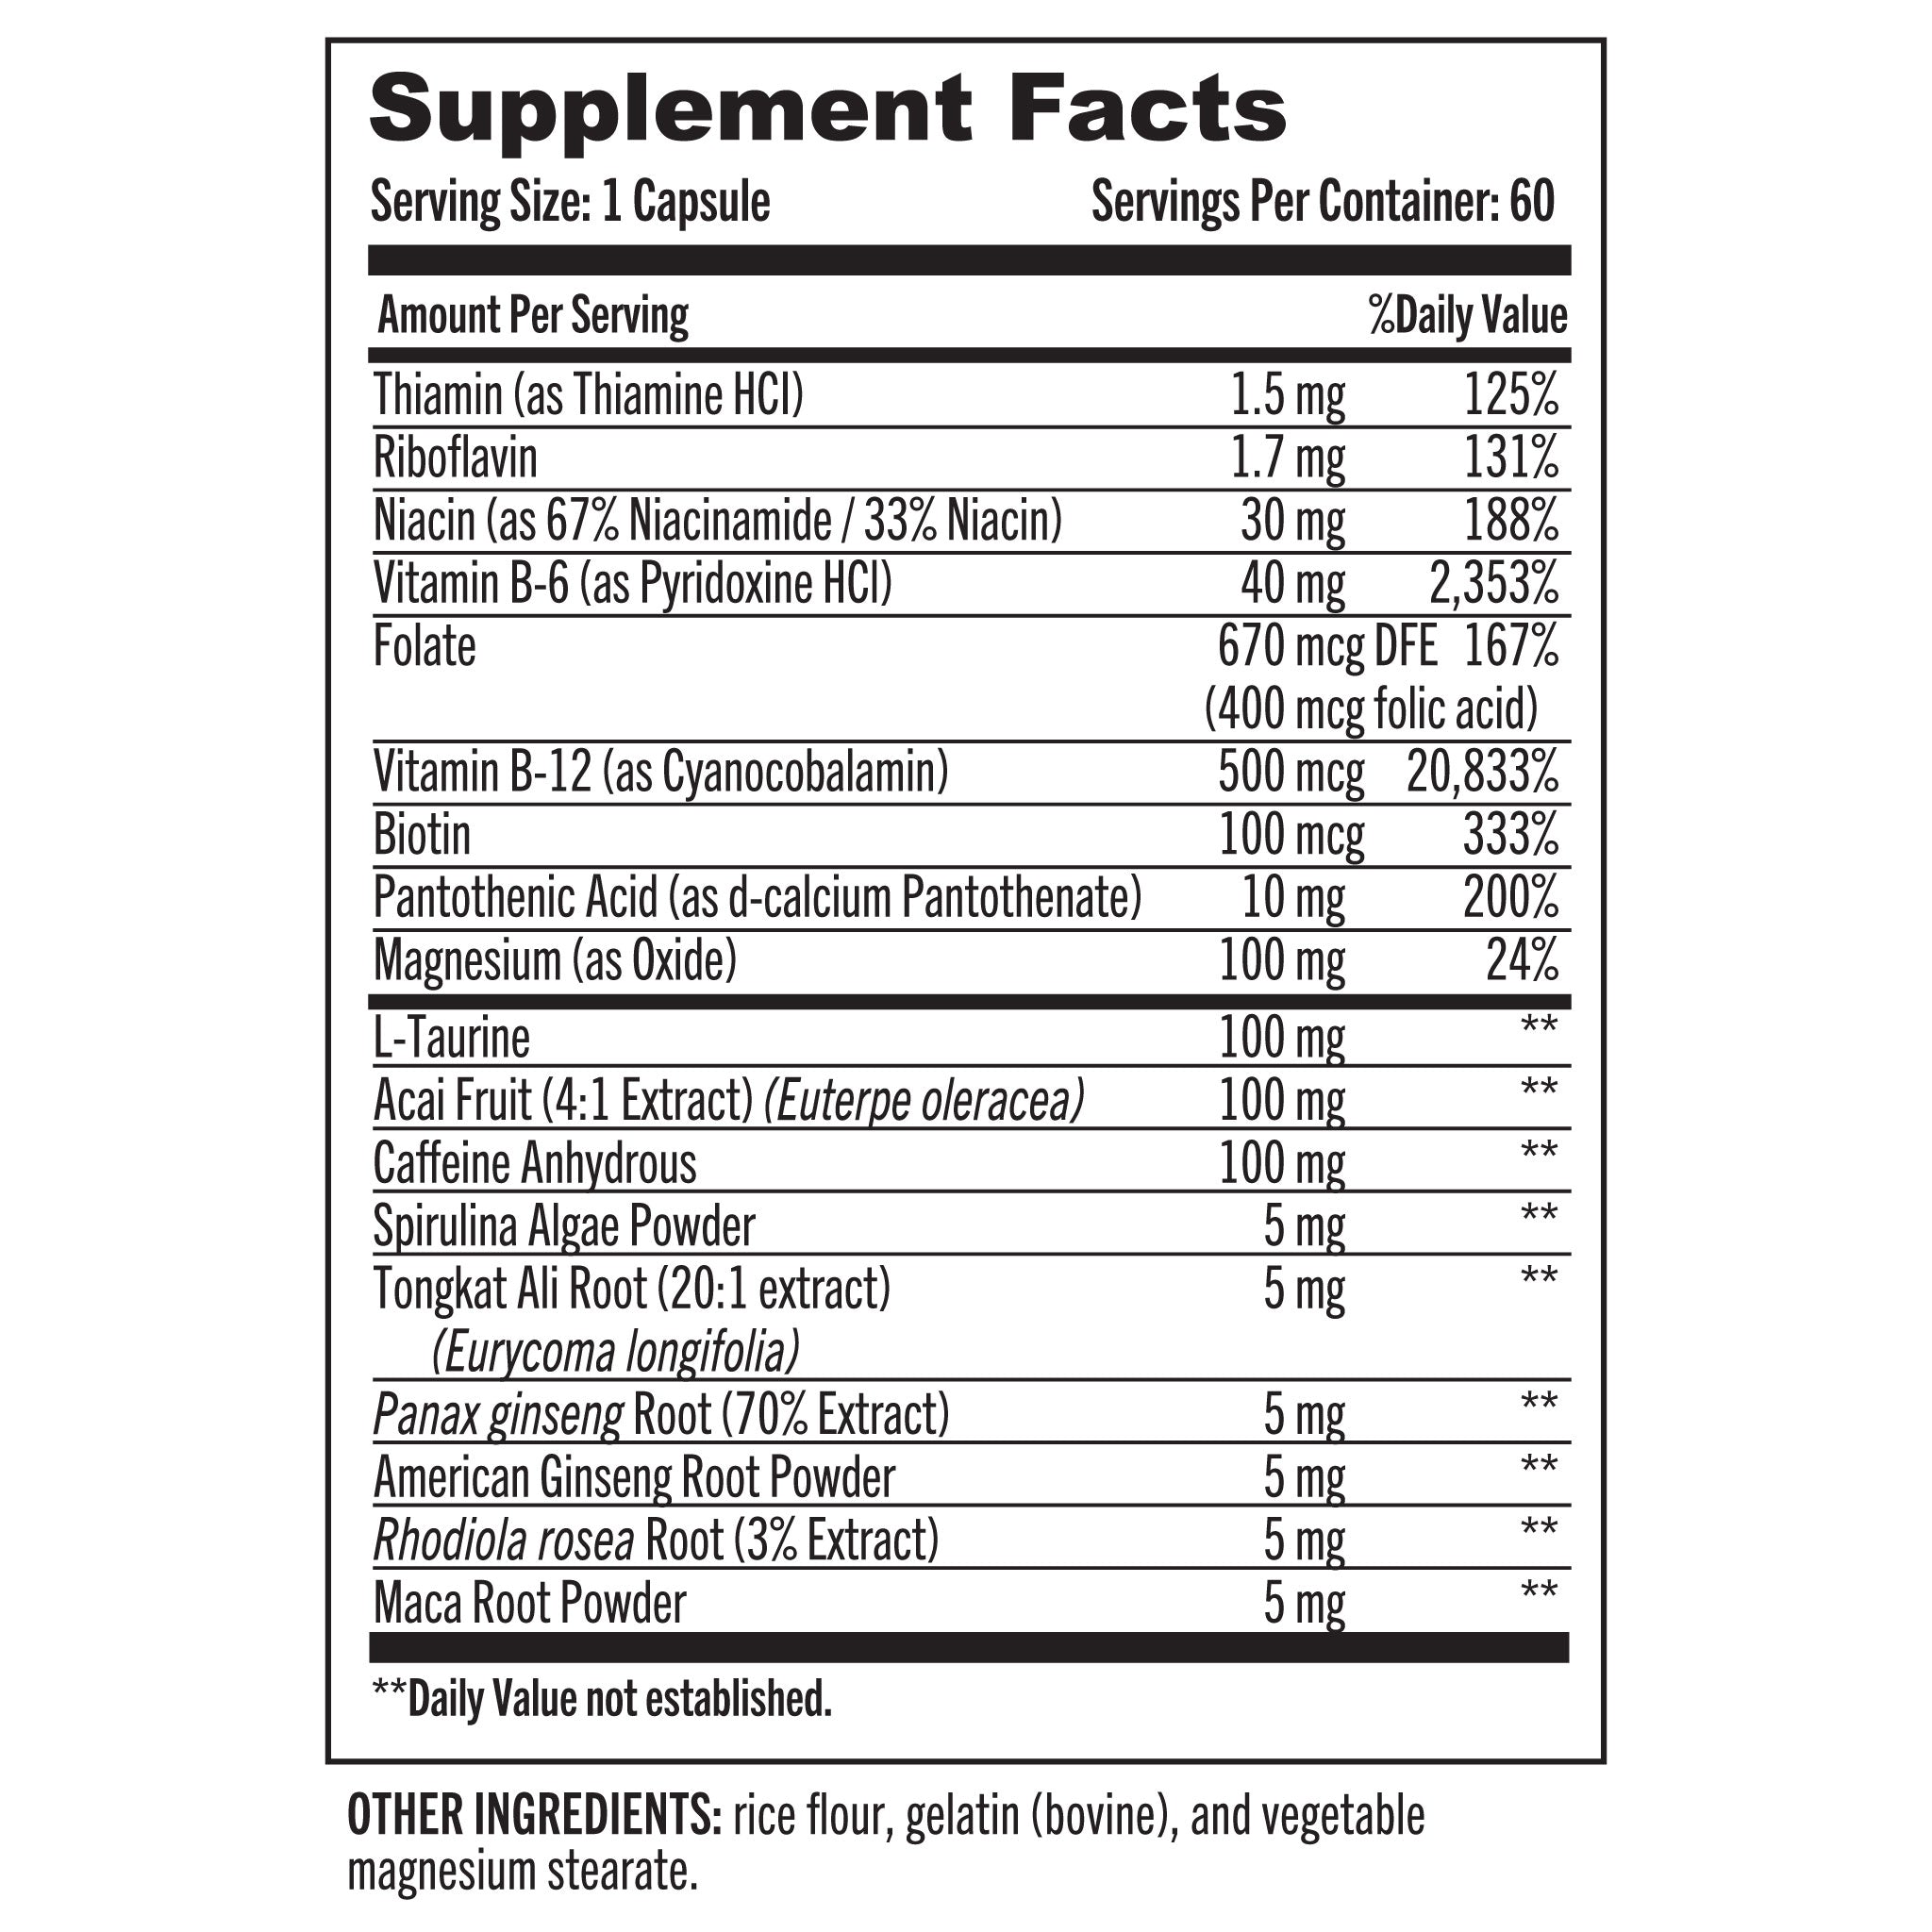 Supplement Facts Panel Image